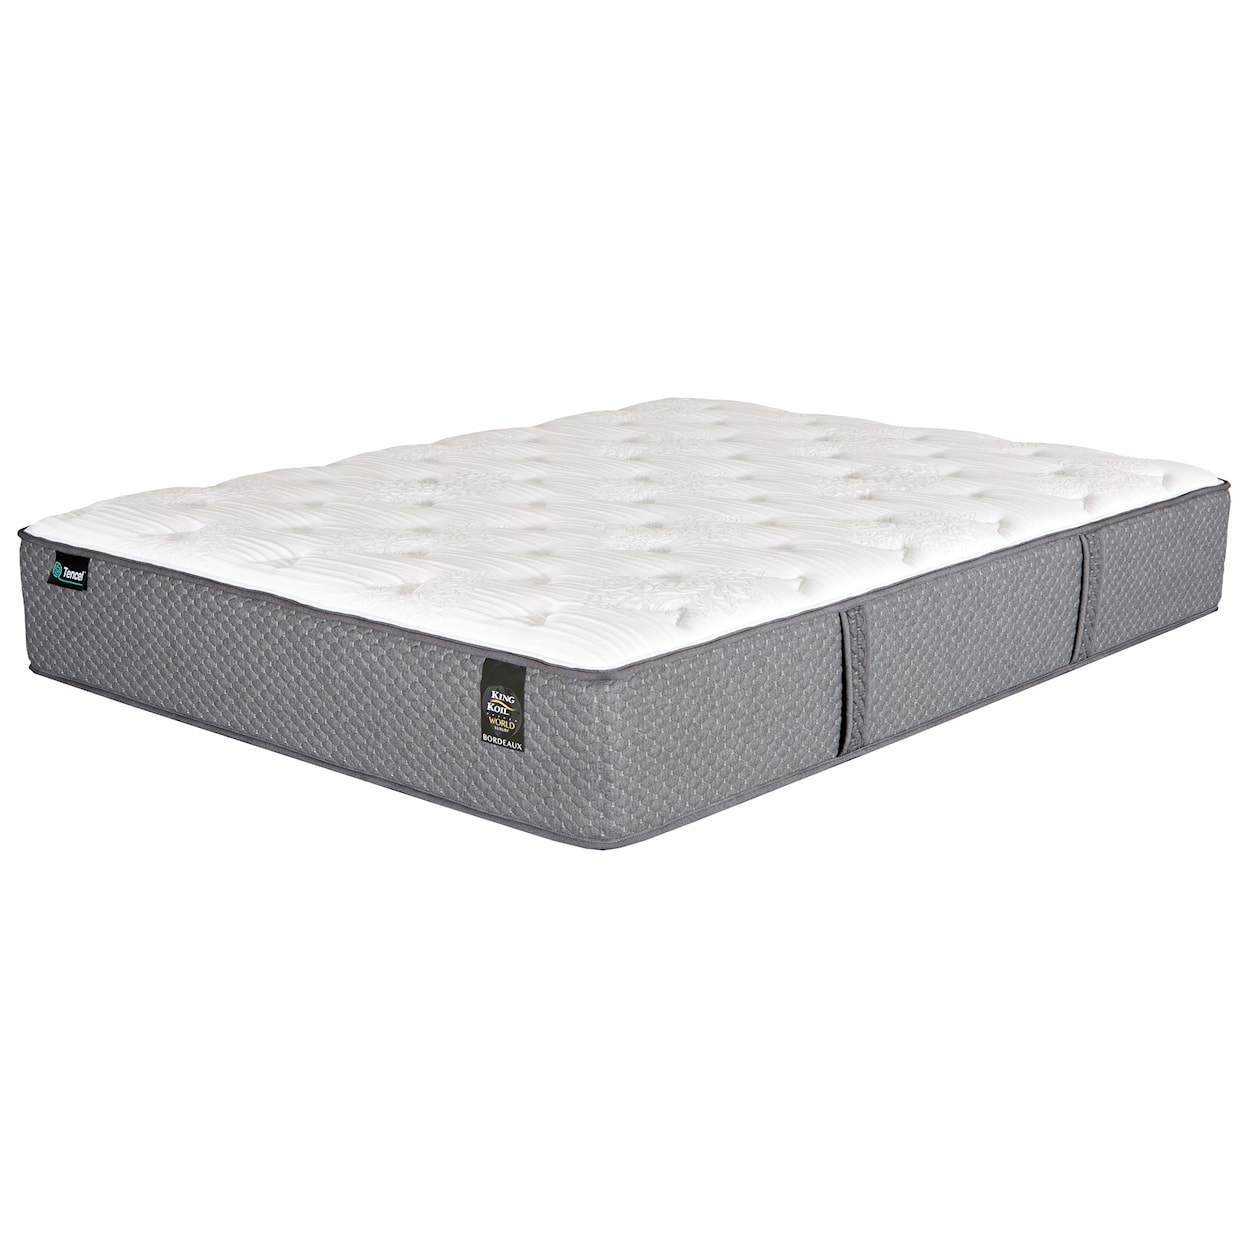 King Koil Beaumont P King Pocketed Coil Mattress